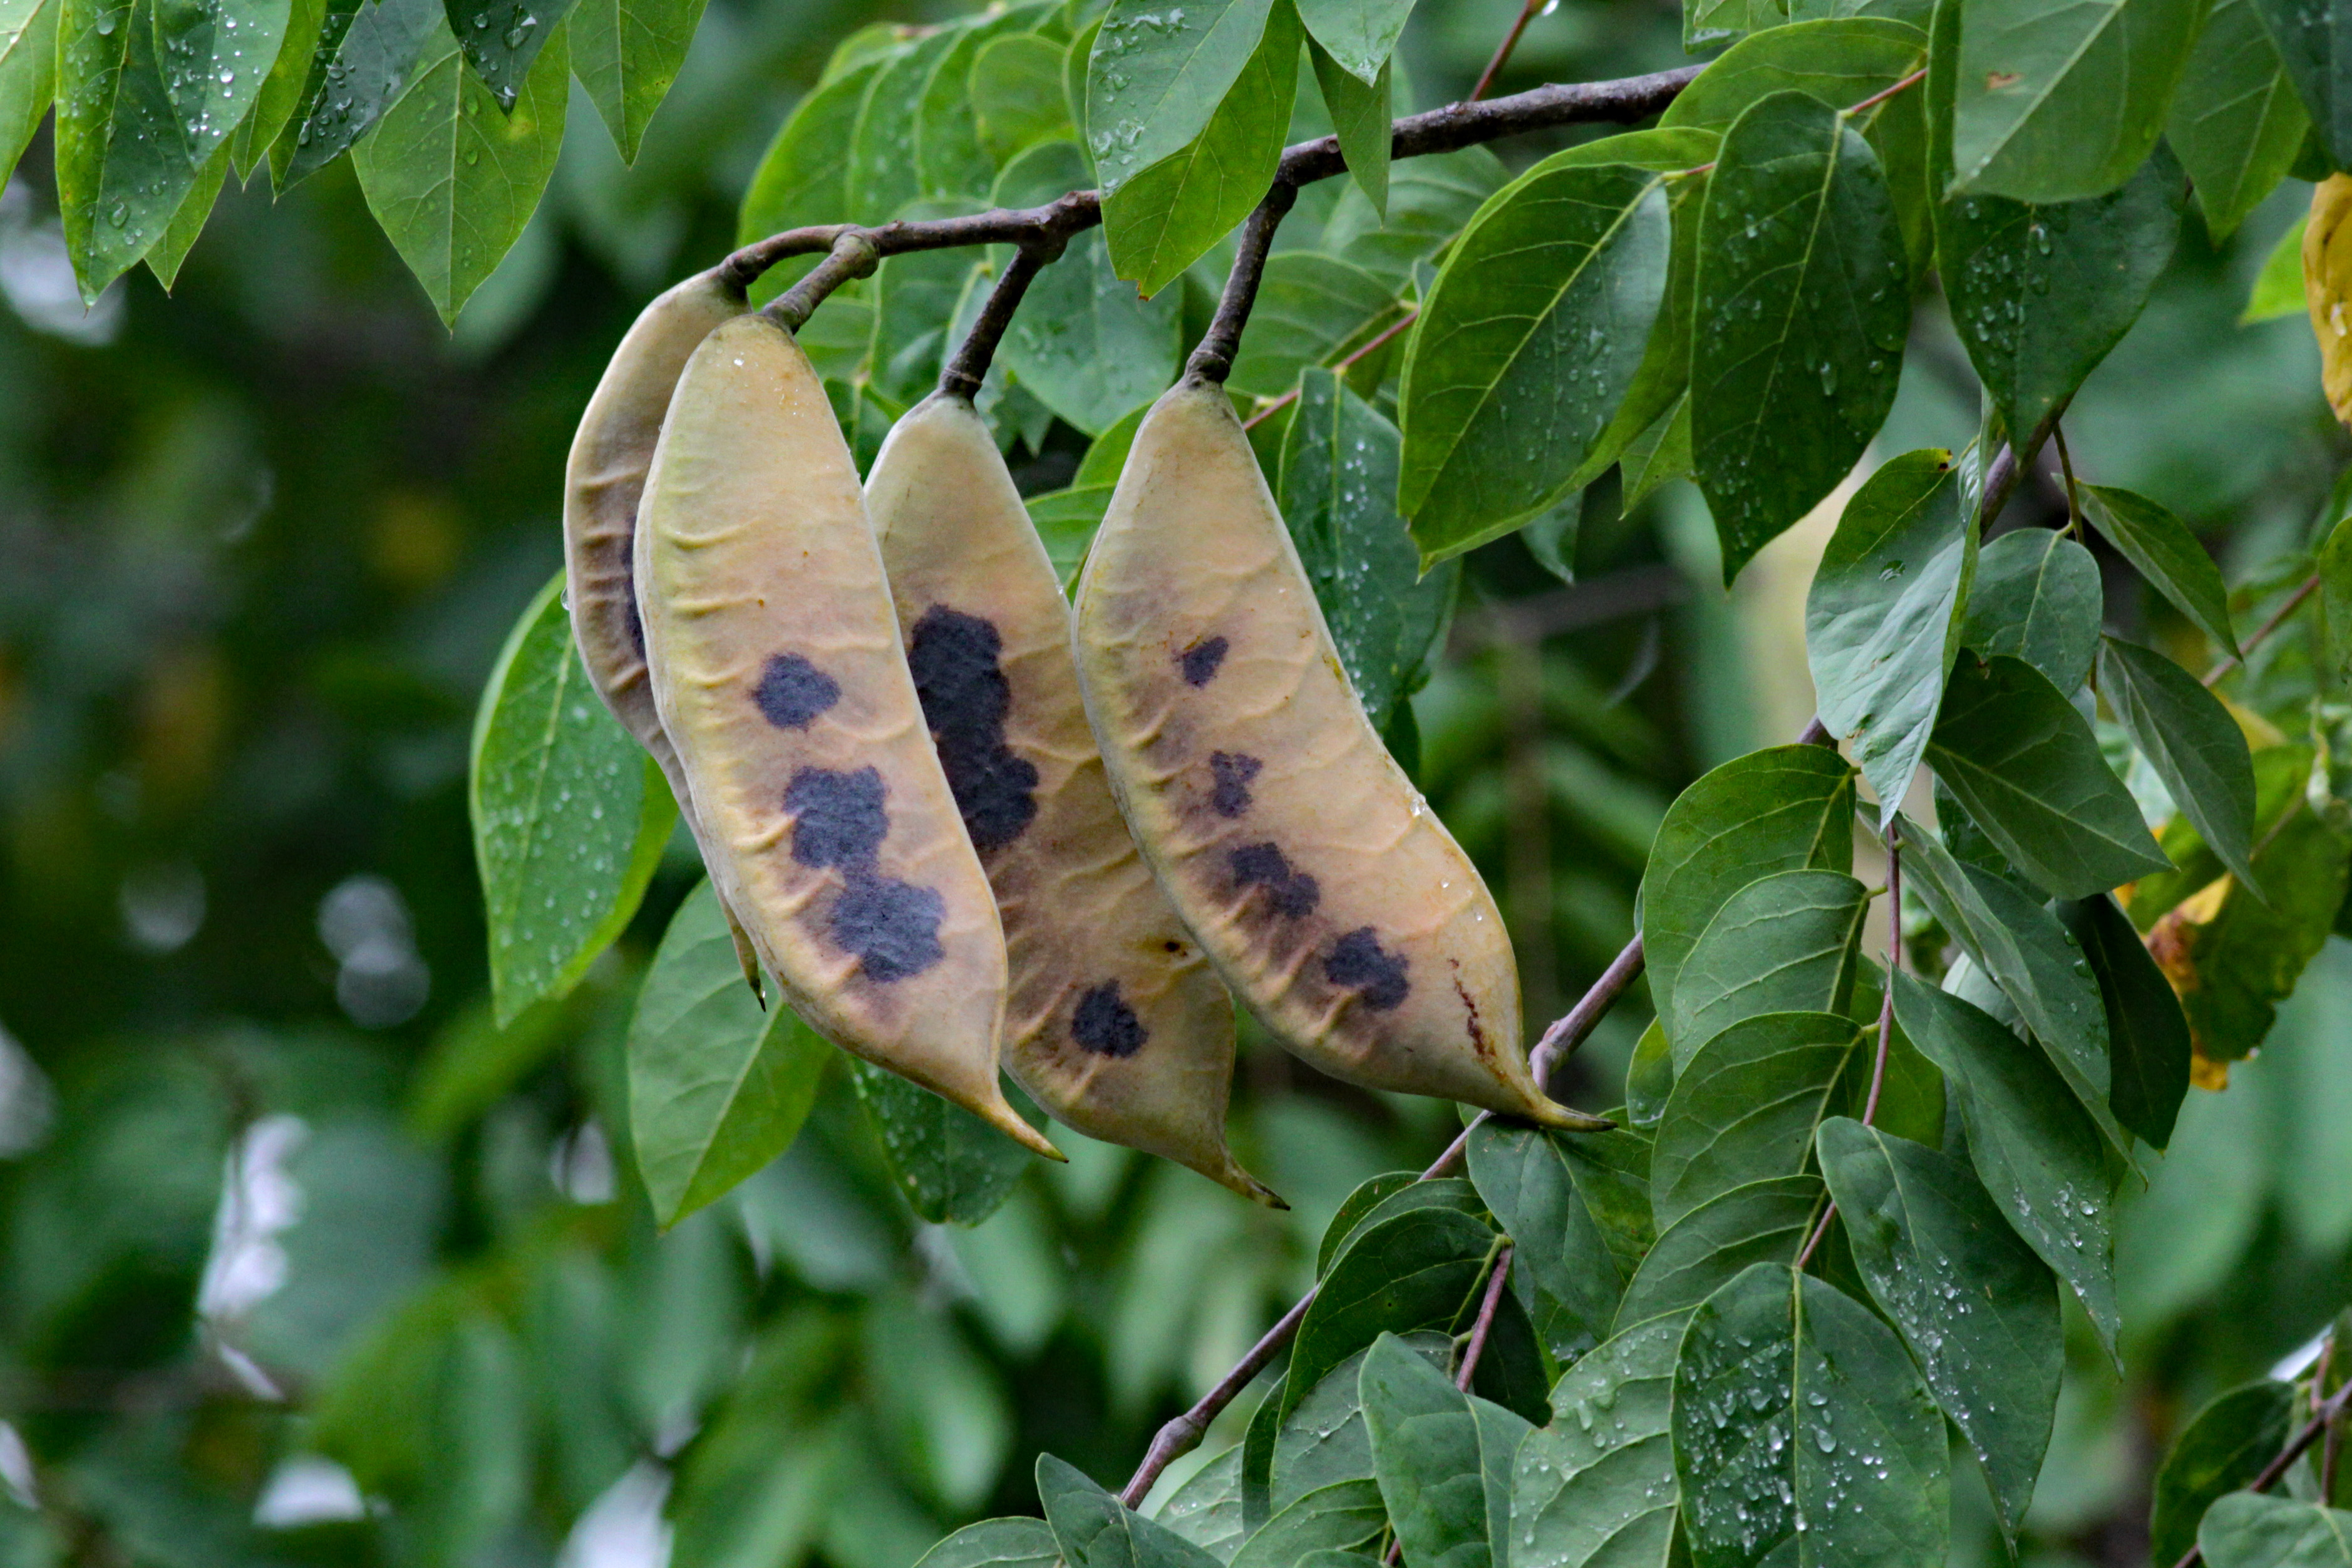 The Scientific Name is Gymnocladus dioicus. You will likely hear them called Kentucky Coffeetree, Kentucky Mahogany. This picture shows the Fruits are thick, leathery pods produced on female trees in late summer. While seeds and seedpods are toxic, roasted seeds have been used as a coffee substitute.  of Gymnocladus dioicus